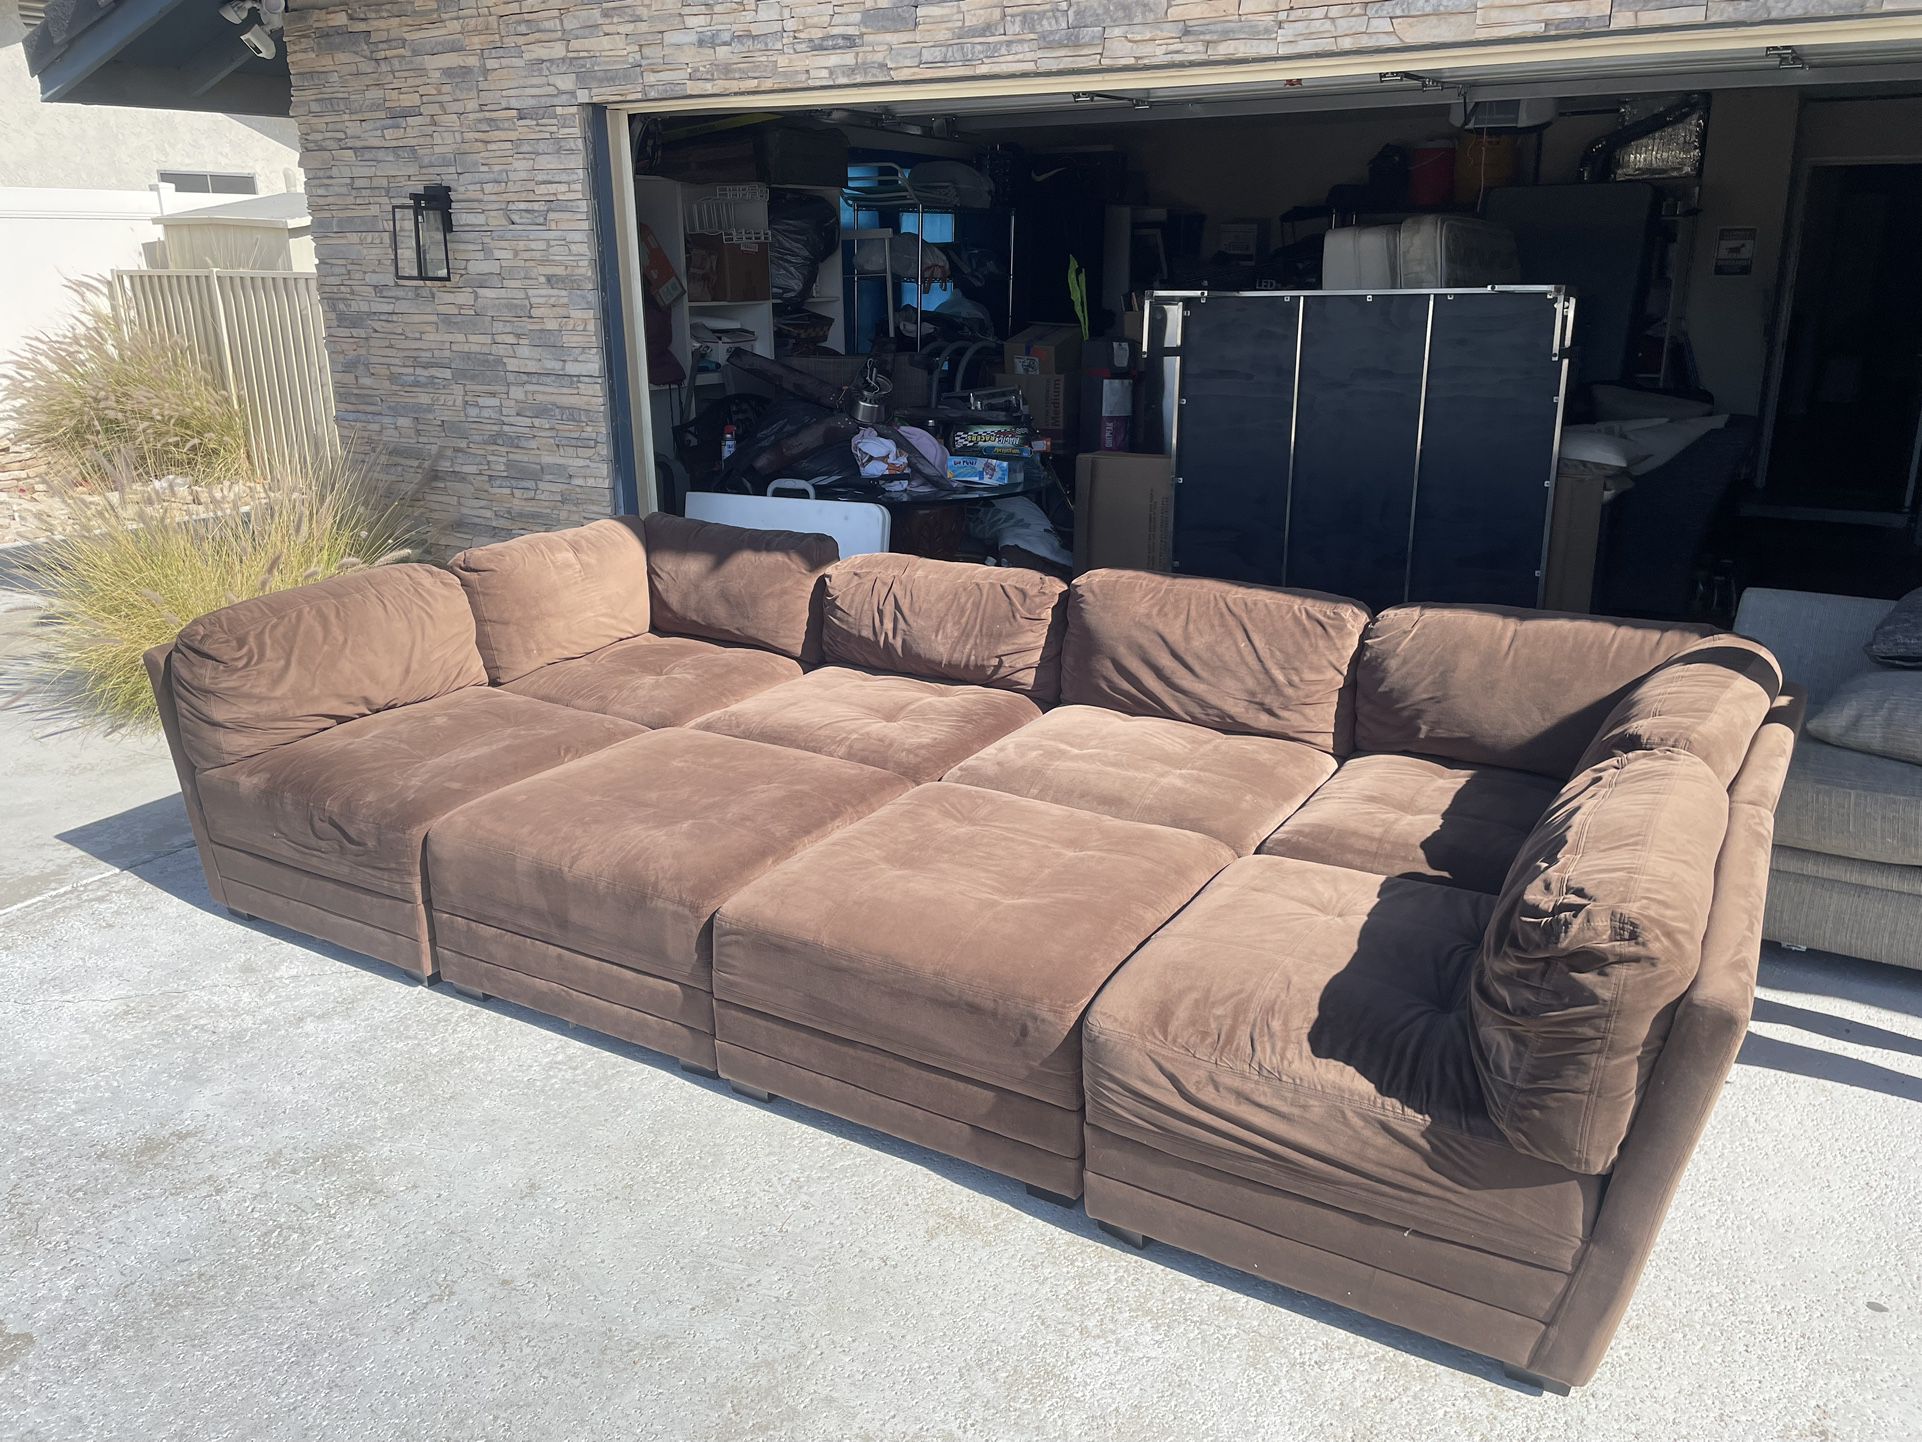 Large Brown Sectional Sofa